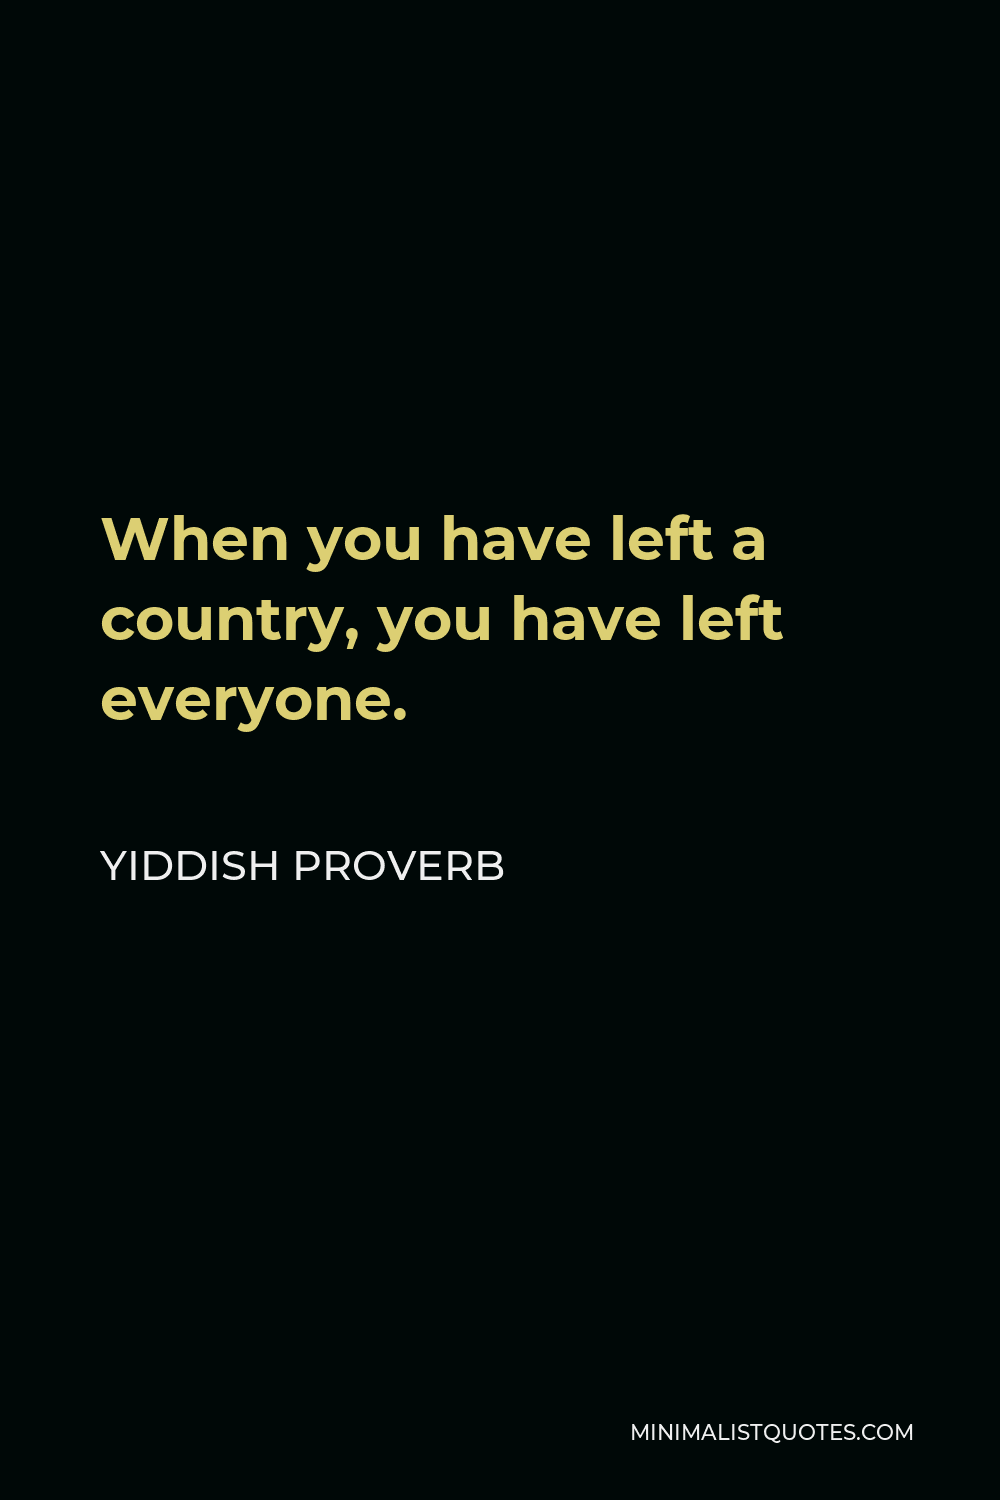 Yiddish Proverb Quote - When you have left a country, you have left everyone.